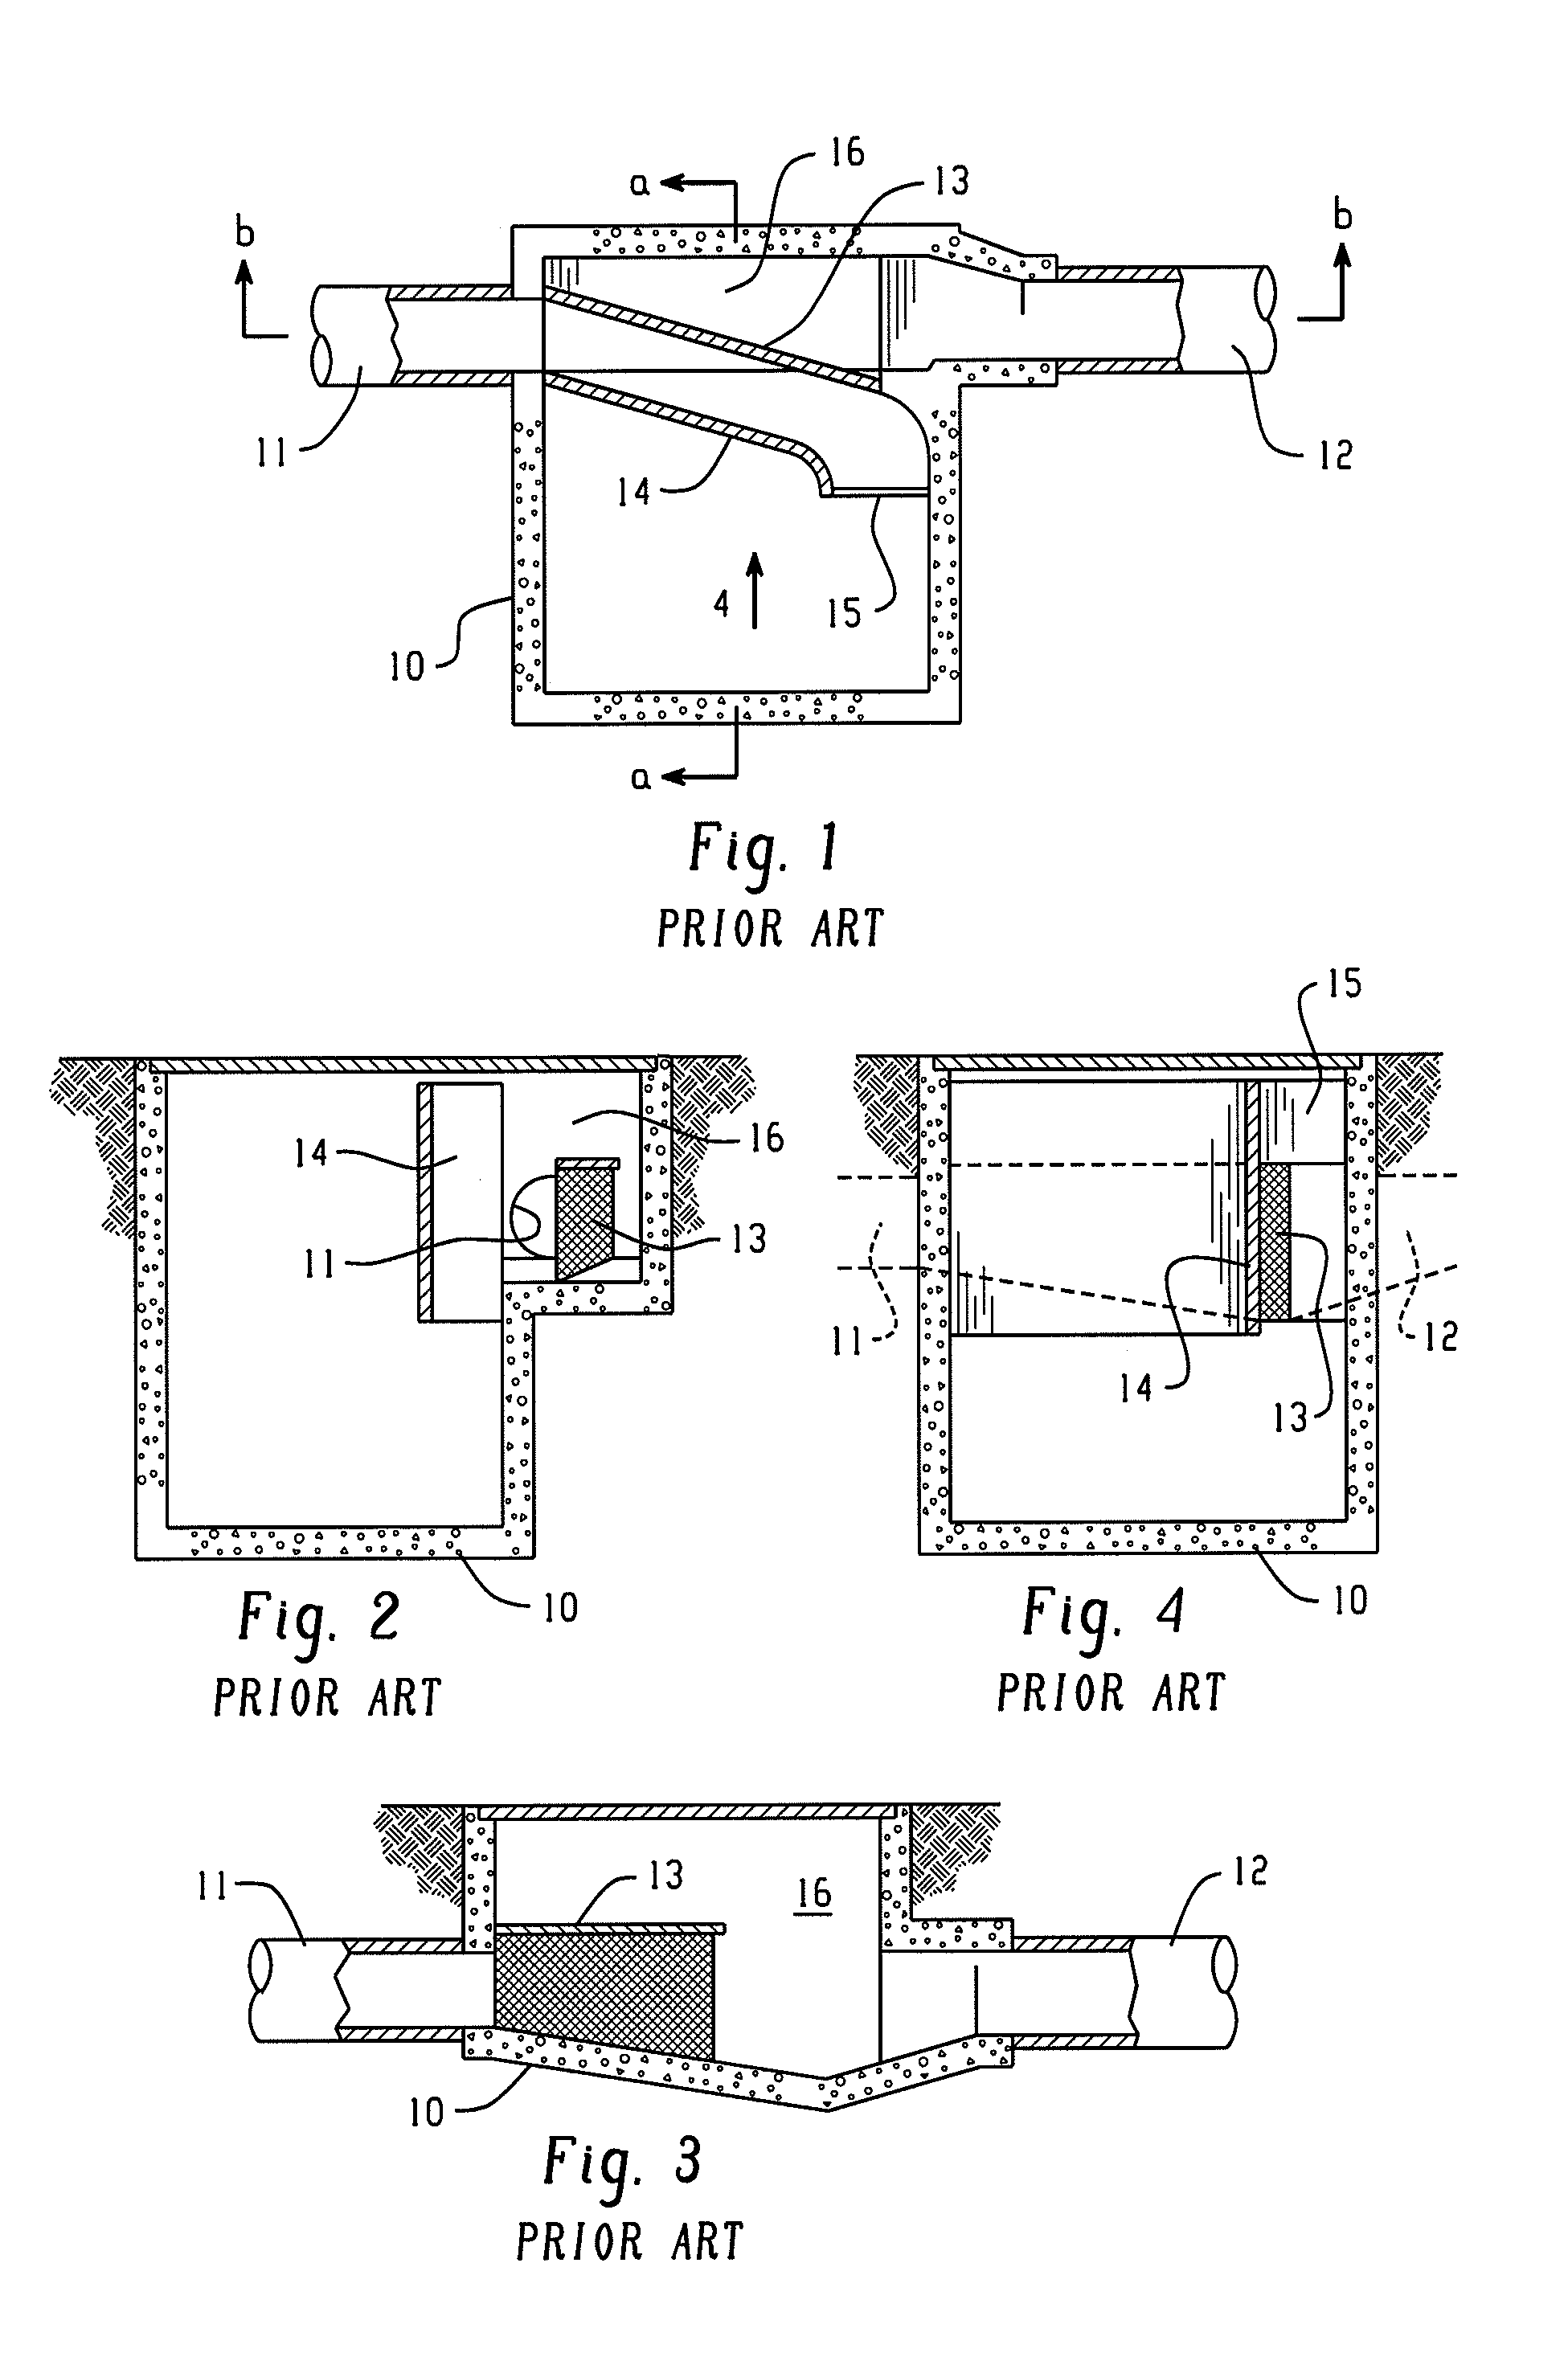 Apparatus for separating solids from flowing liquids